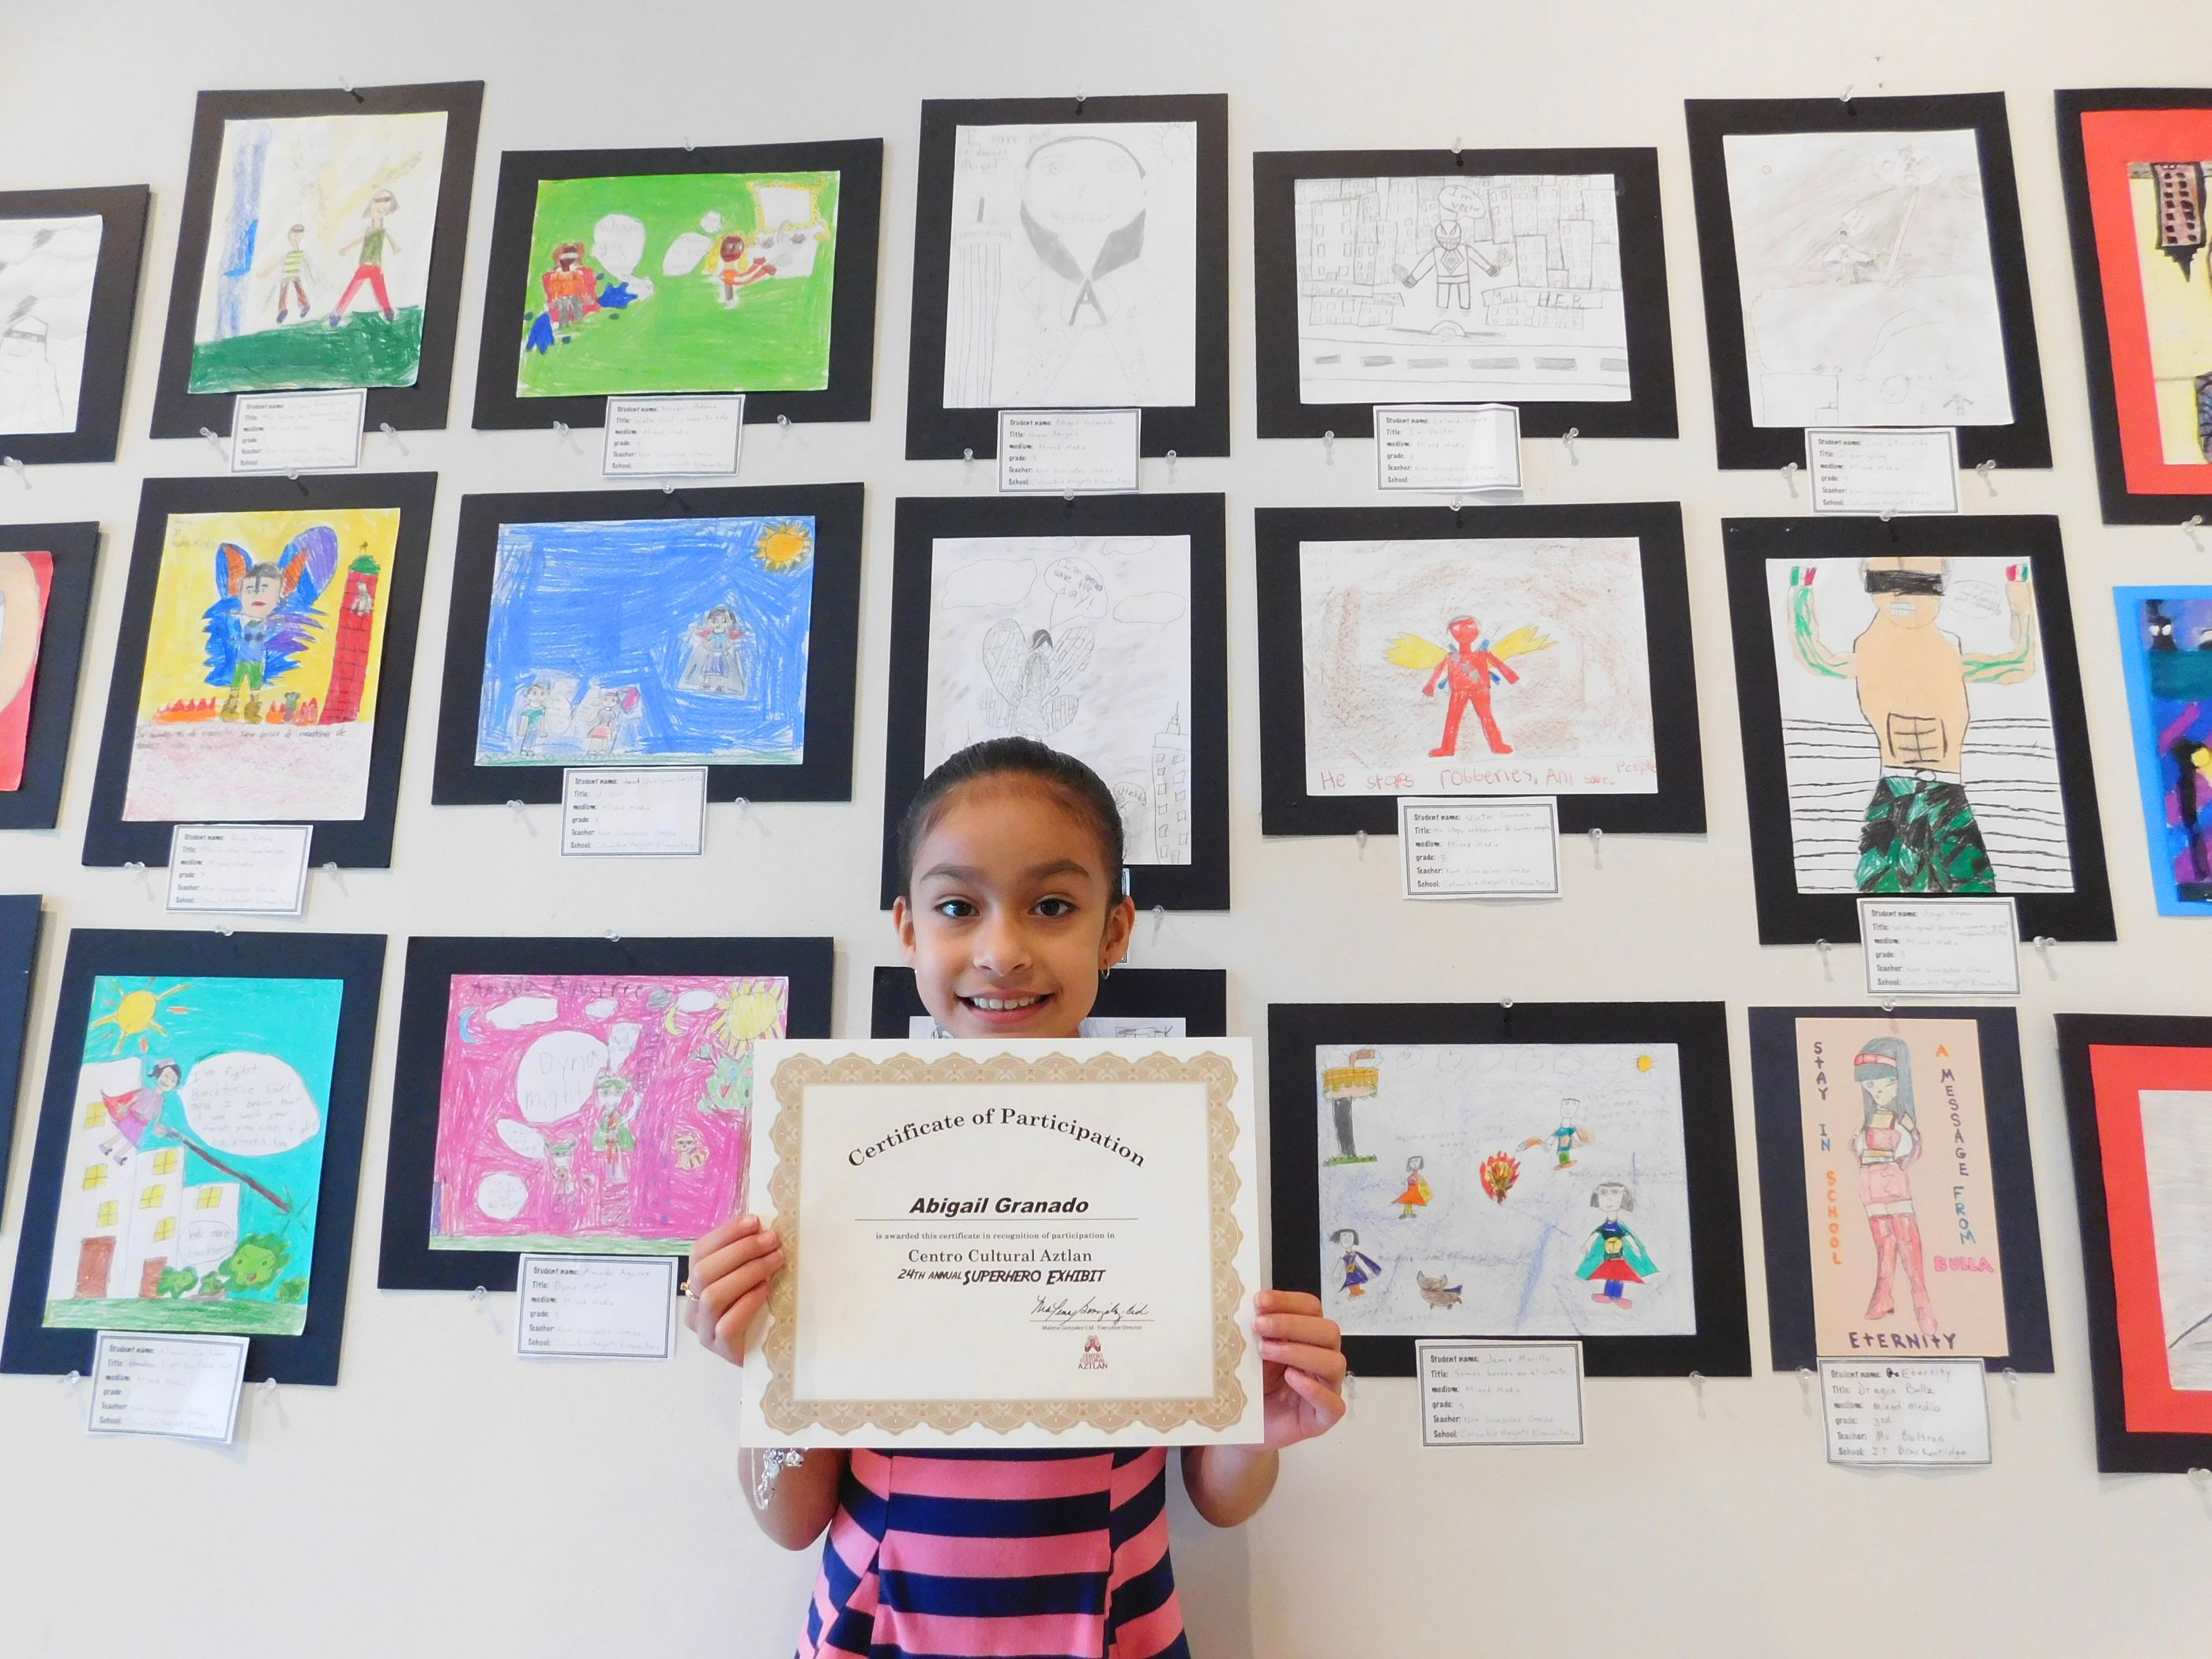 Young girl holding up a certificate of participation in front of a wall of drawings.